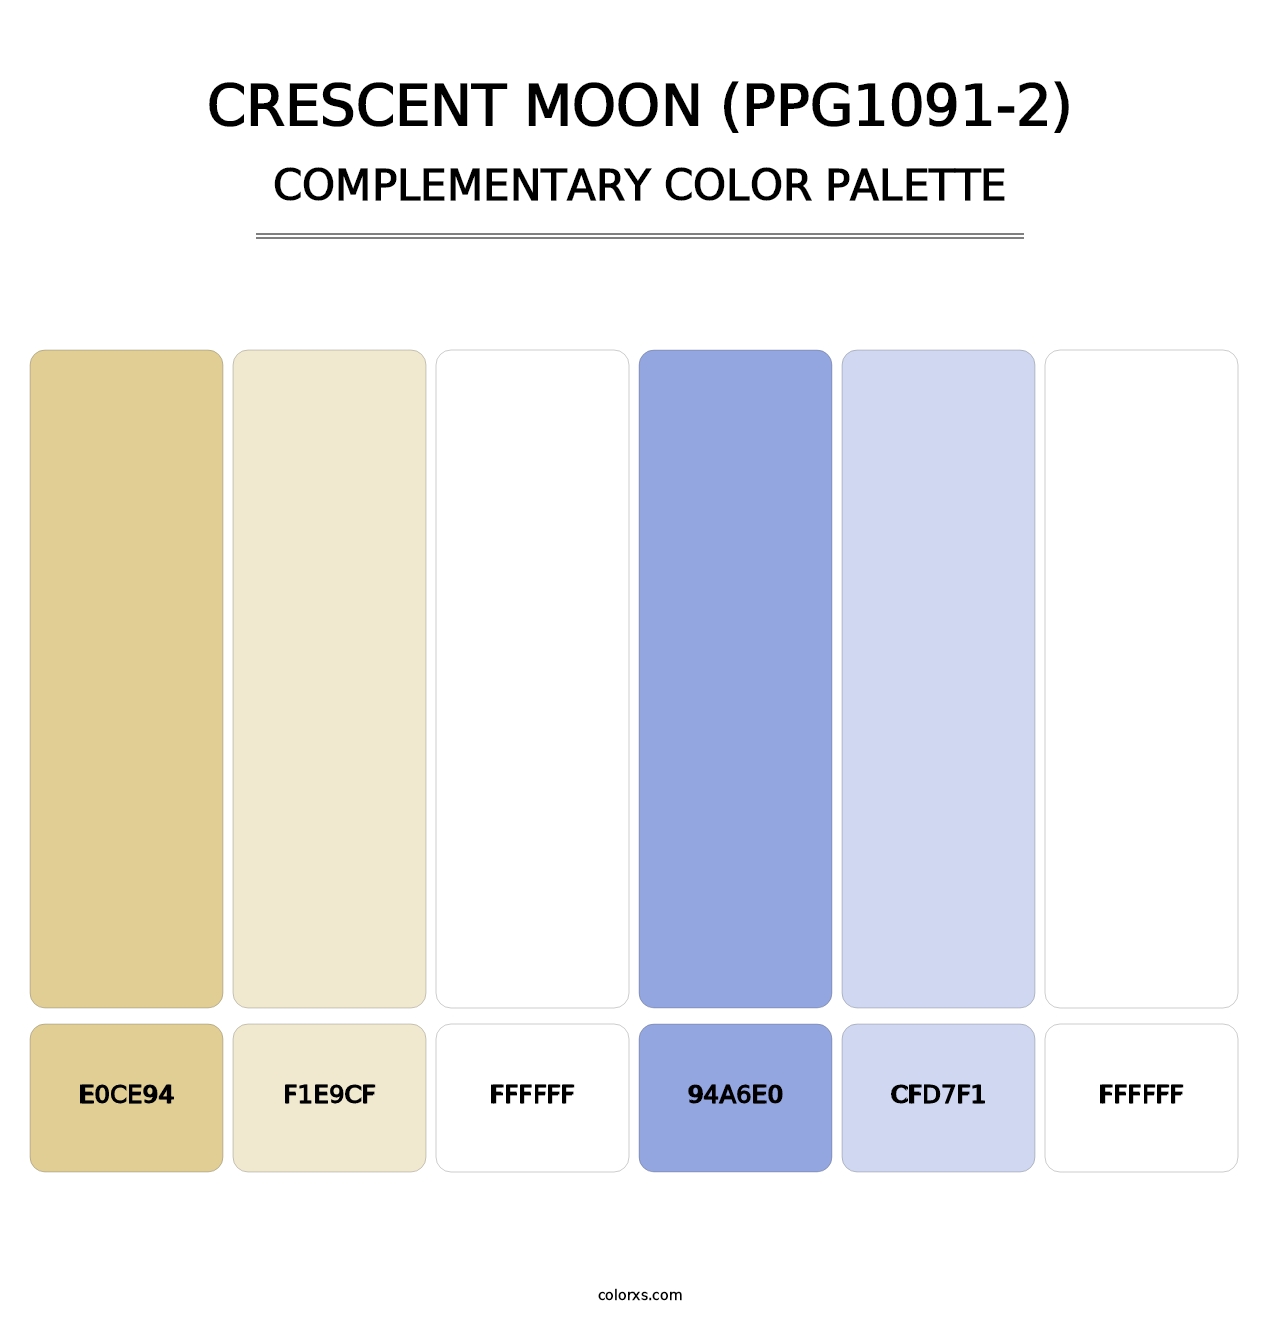 Crescent Moon (PPG1091-2) - Complementary Color Palette